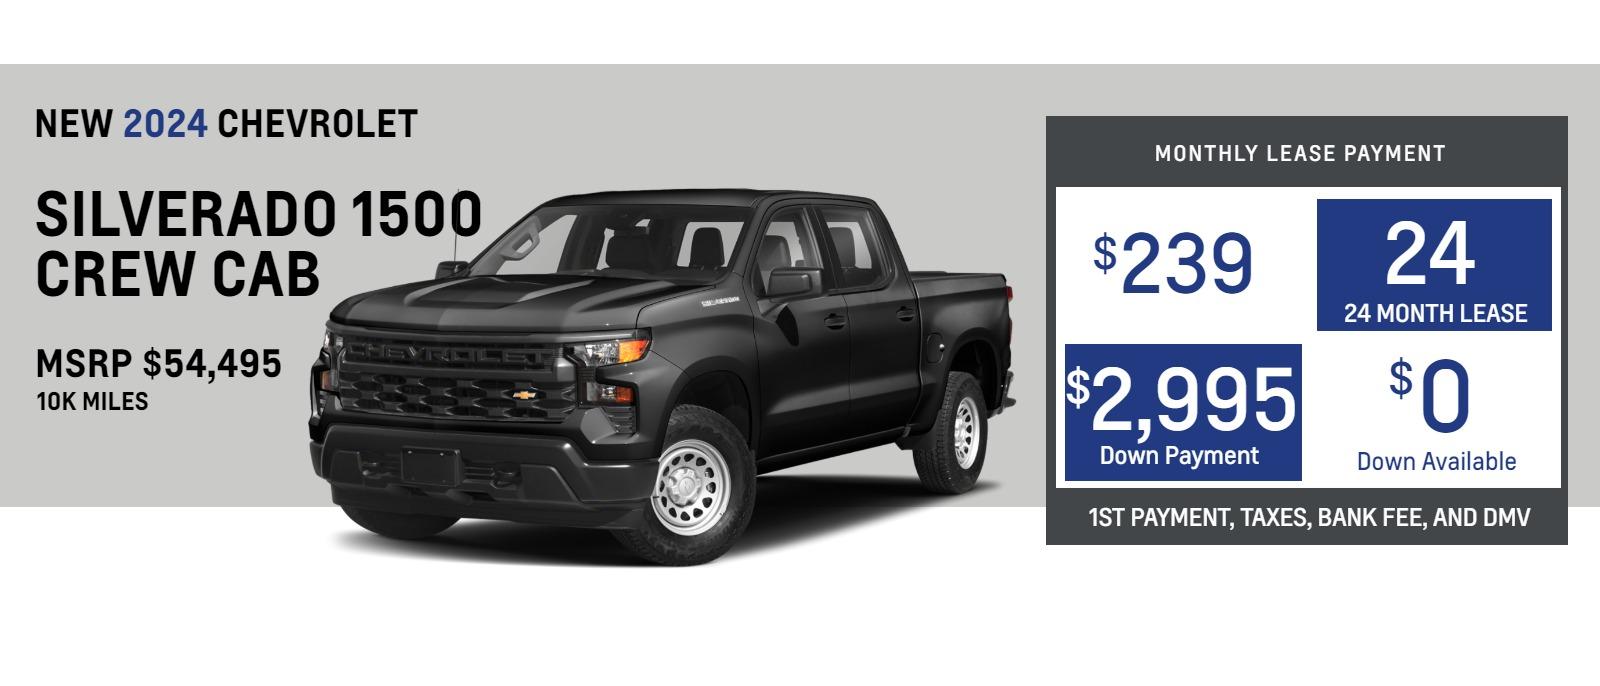 2024 Chevrolet Silverado 4WD Crew Cab
MSRP $54,495.
$239. month
10k
24 months
$2,995. down plus taxes, bank fee and DMV 
*includes all incentives